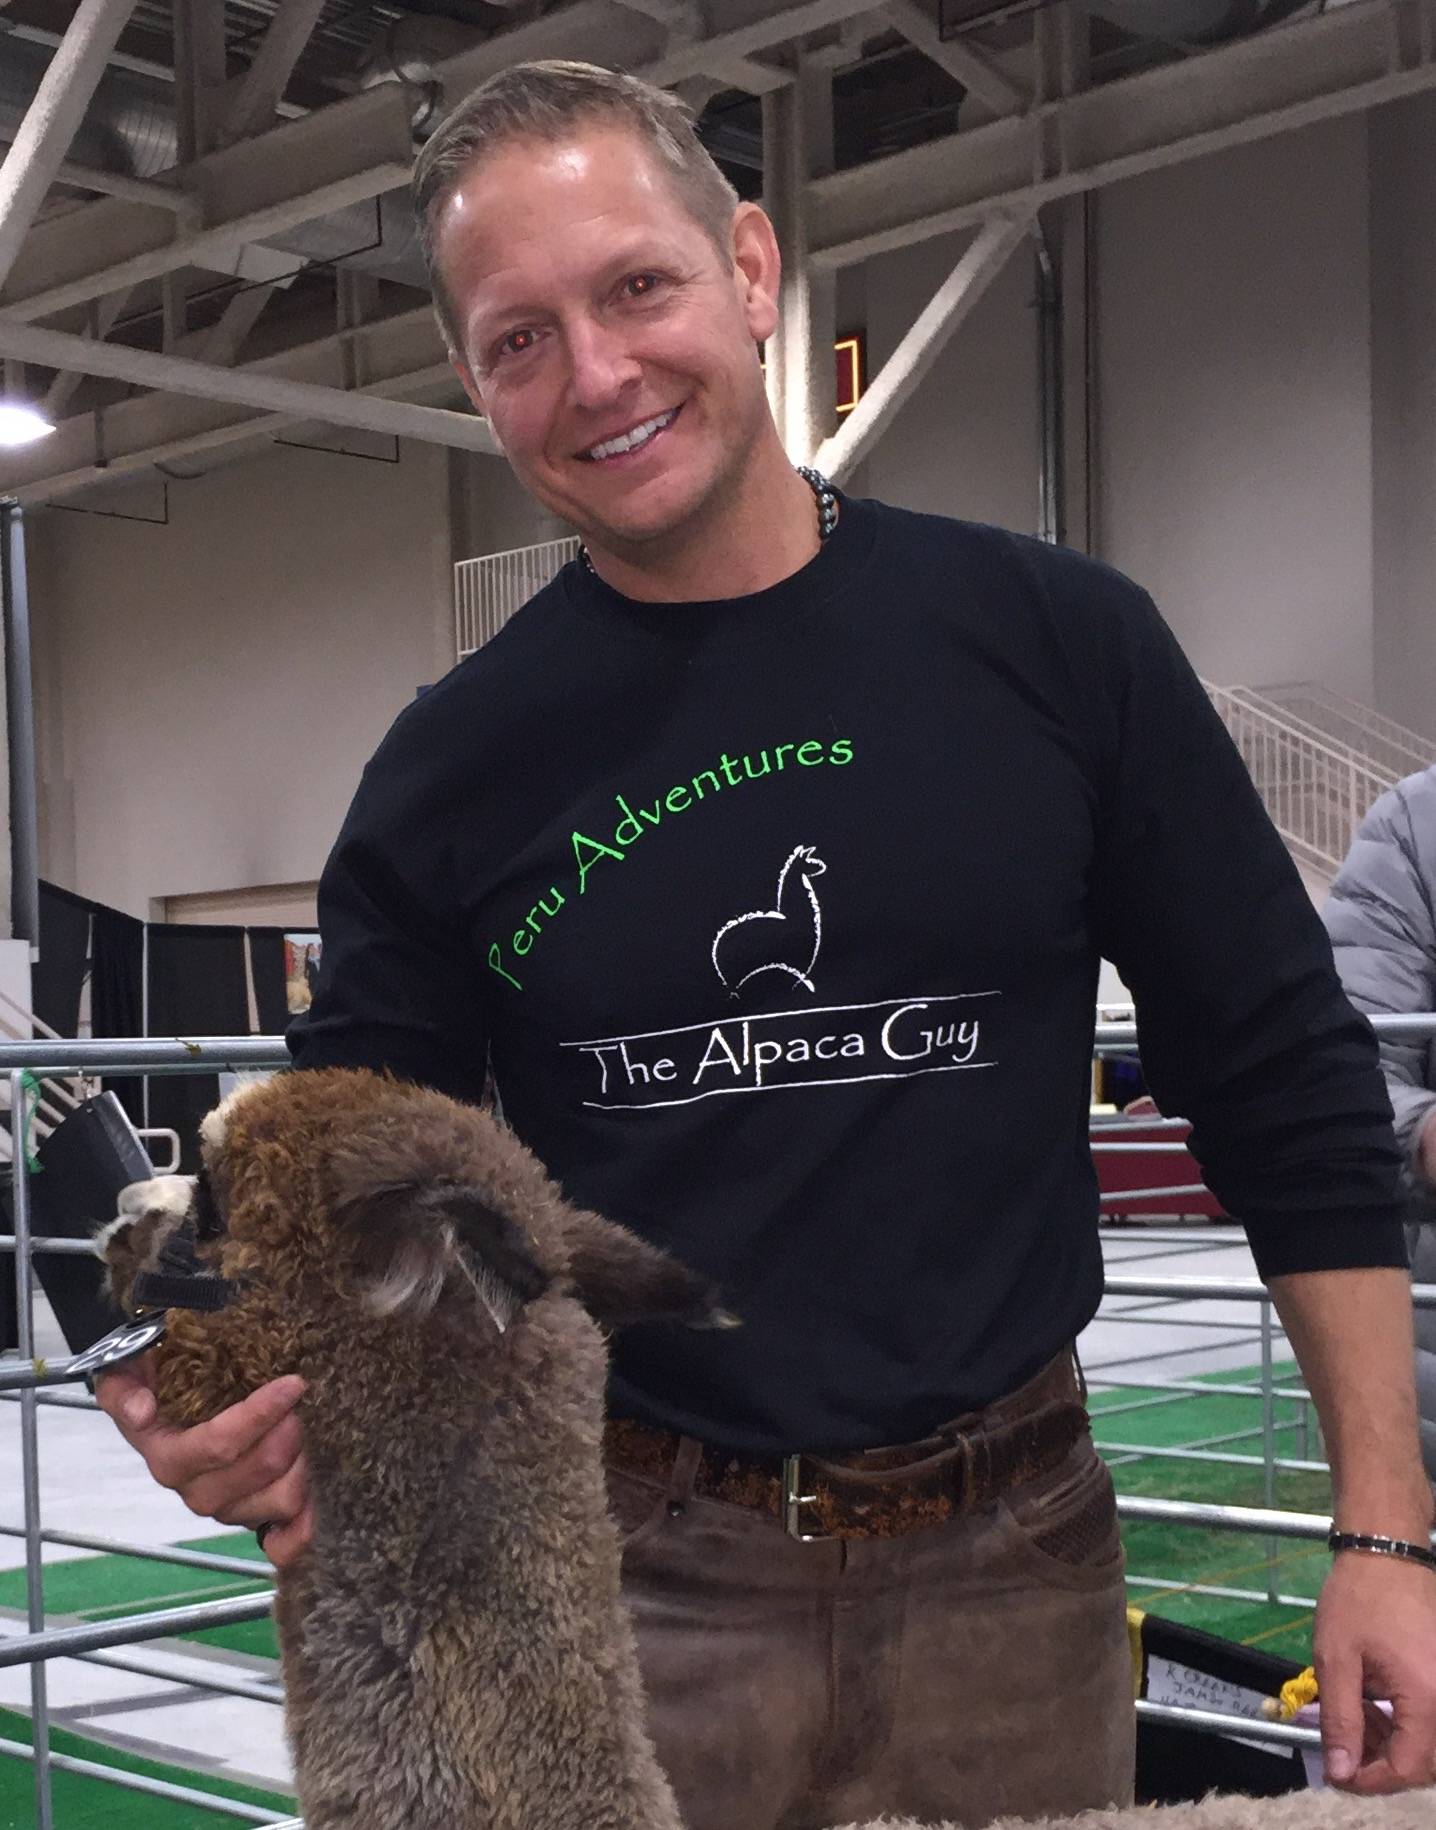 Wade Gease, also known as The Alpaca Guy, will be hosting a series of educational discussions about alpacas at Artswork Gallery in Kenai on Sept. 1 and 2. The talks will start at noon, 2 p.m. and 4 p.m. each day. (Submitted photo)